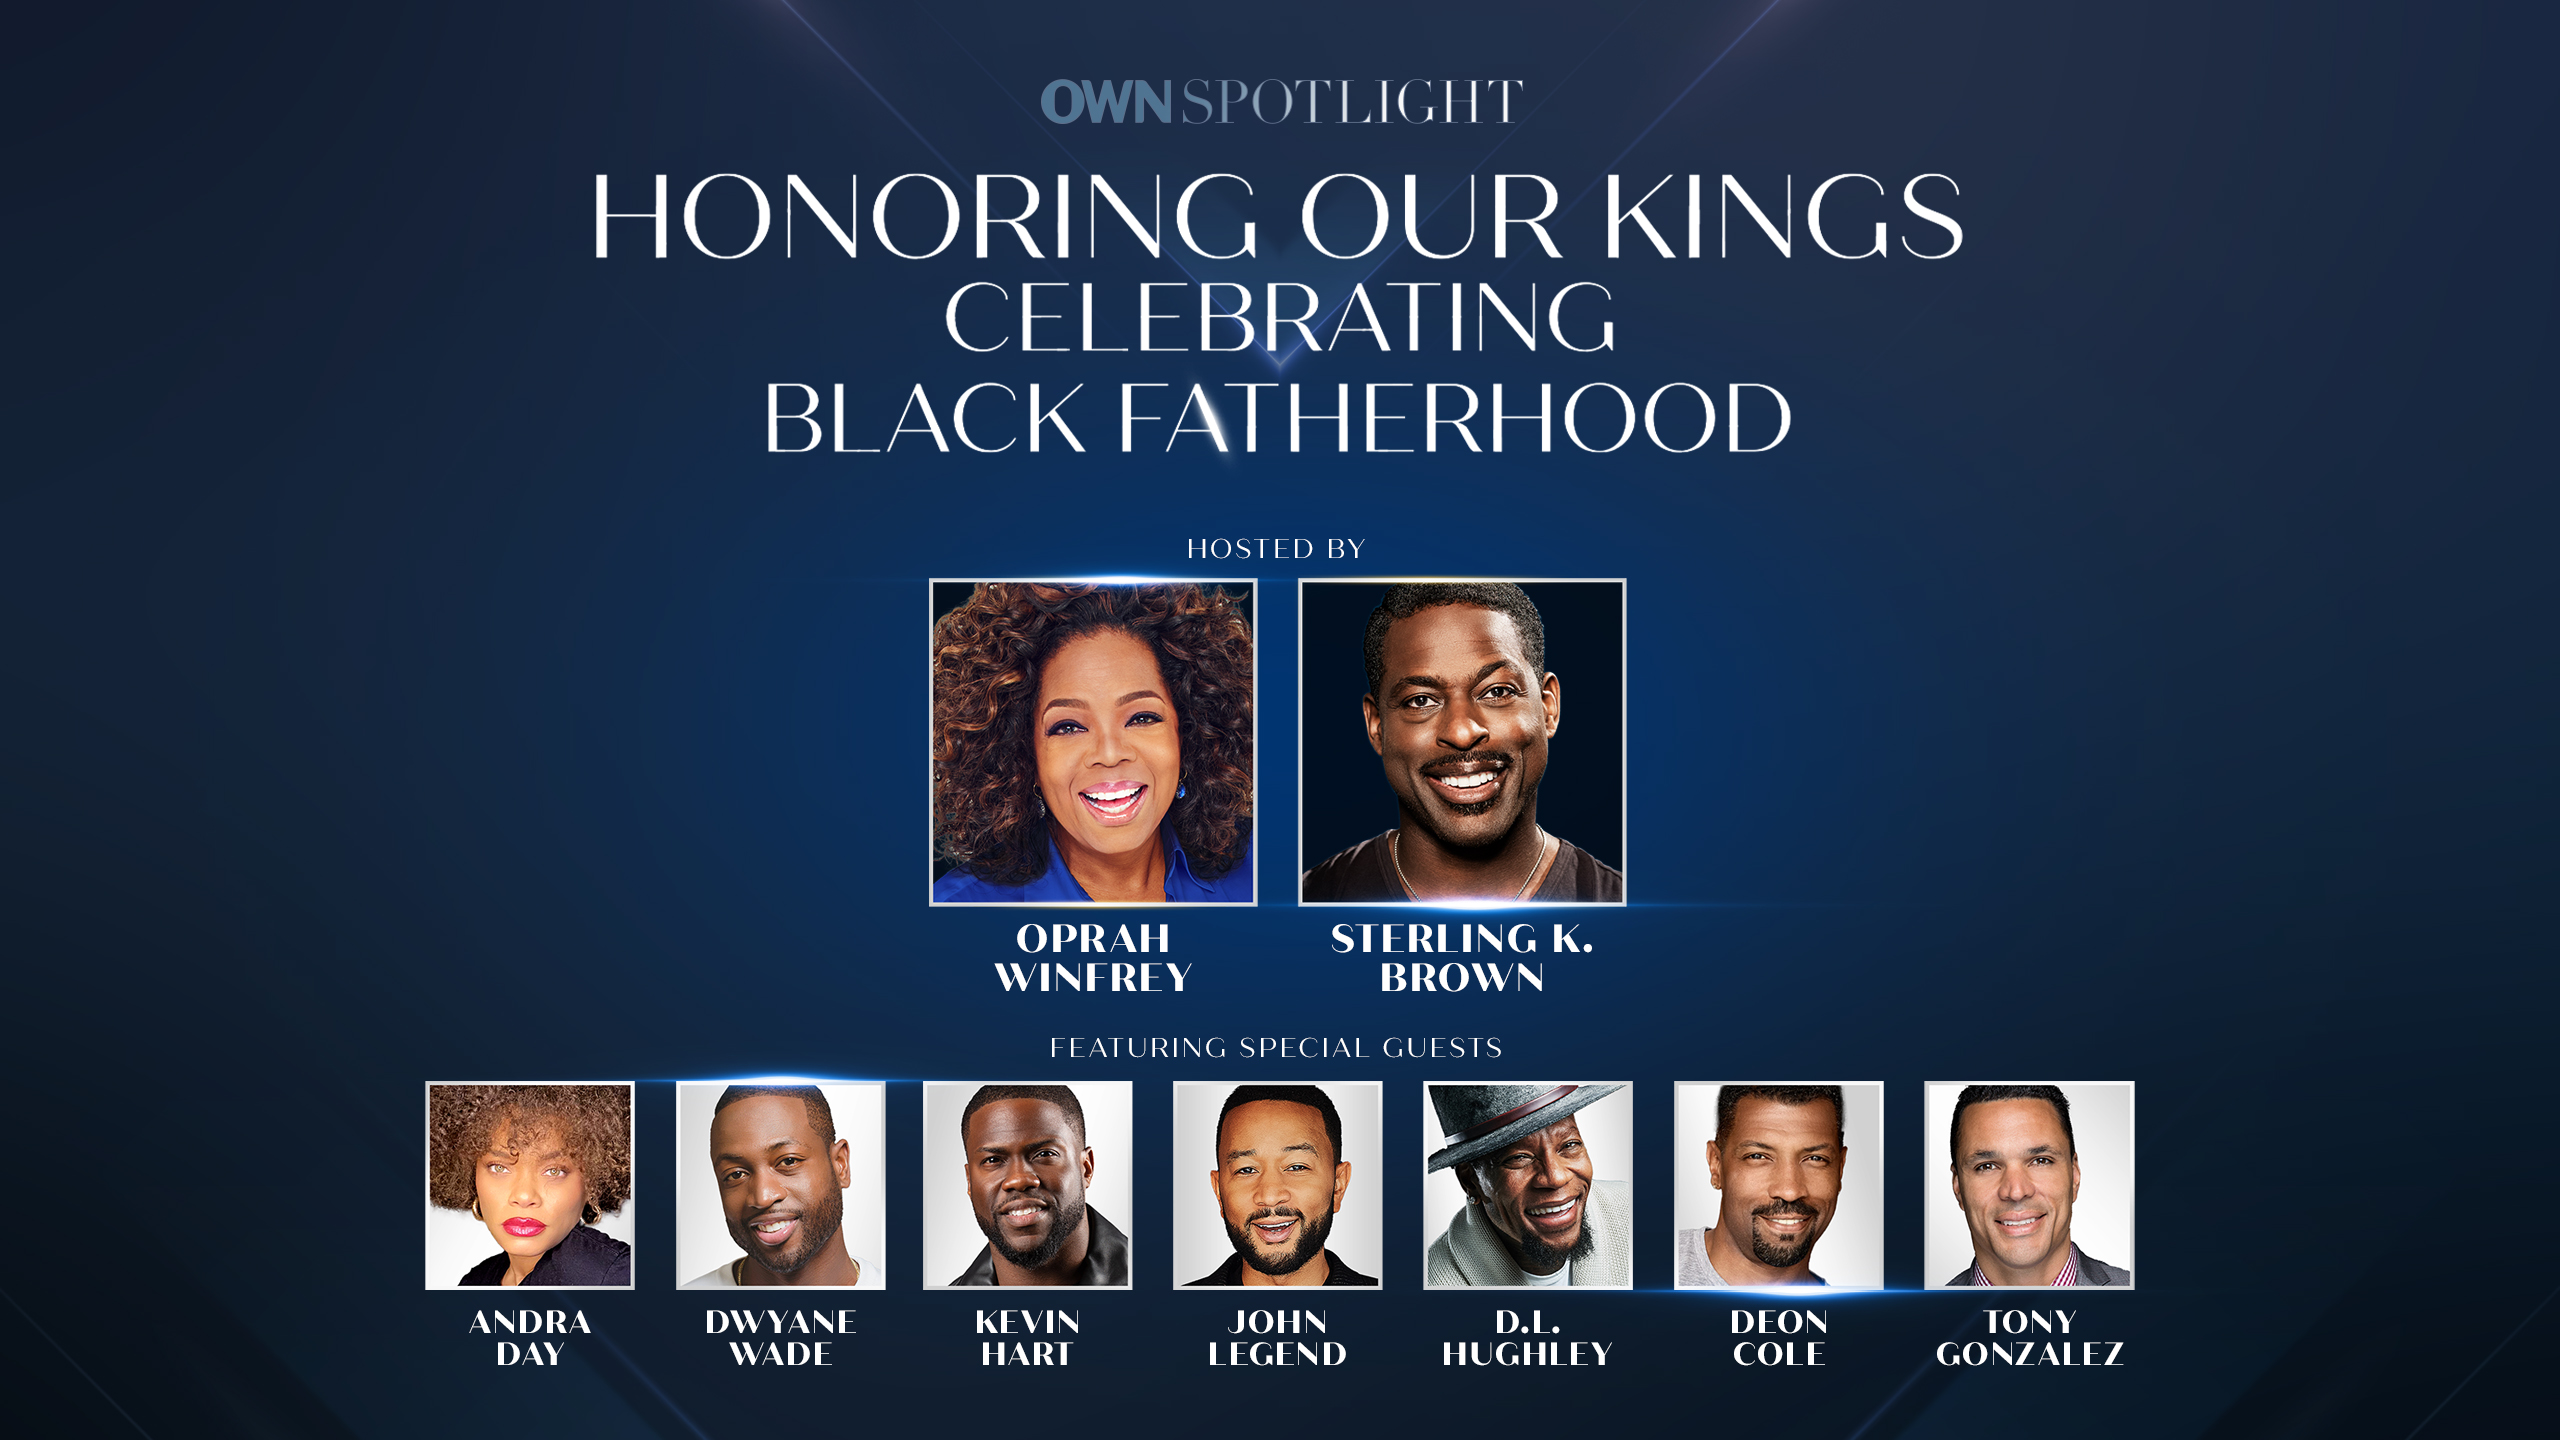 Oprah Winfrey and Sterling K. Brown Celebrate Black Fathers in OWN Special, “Honoring Our Kings: Celebrating Black Fatherhood”